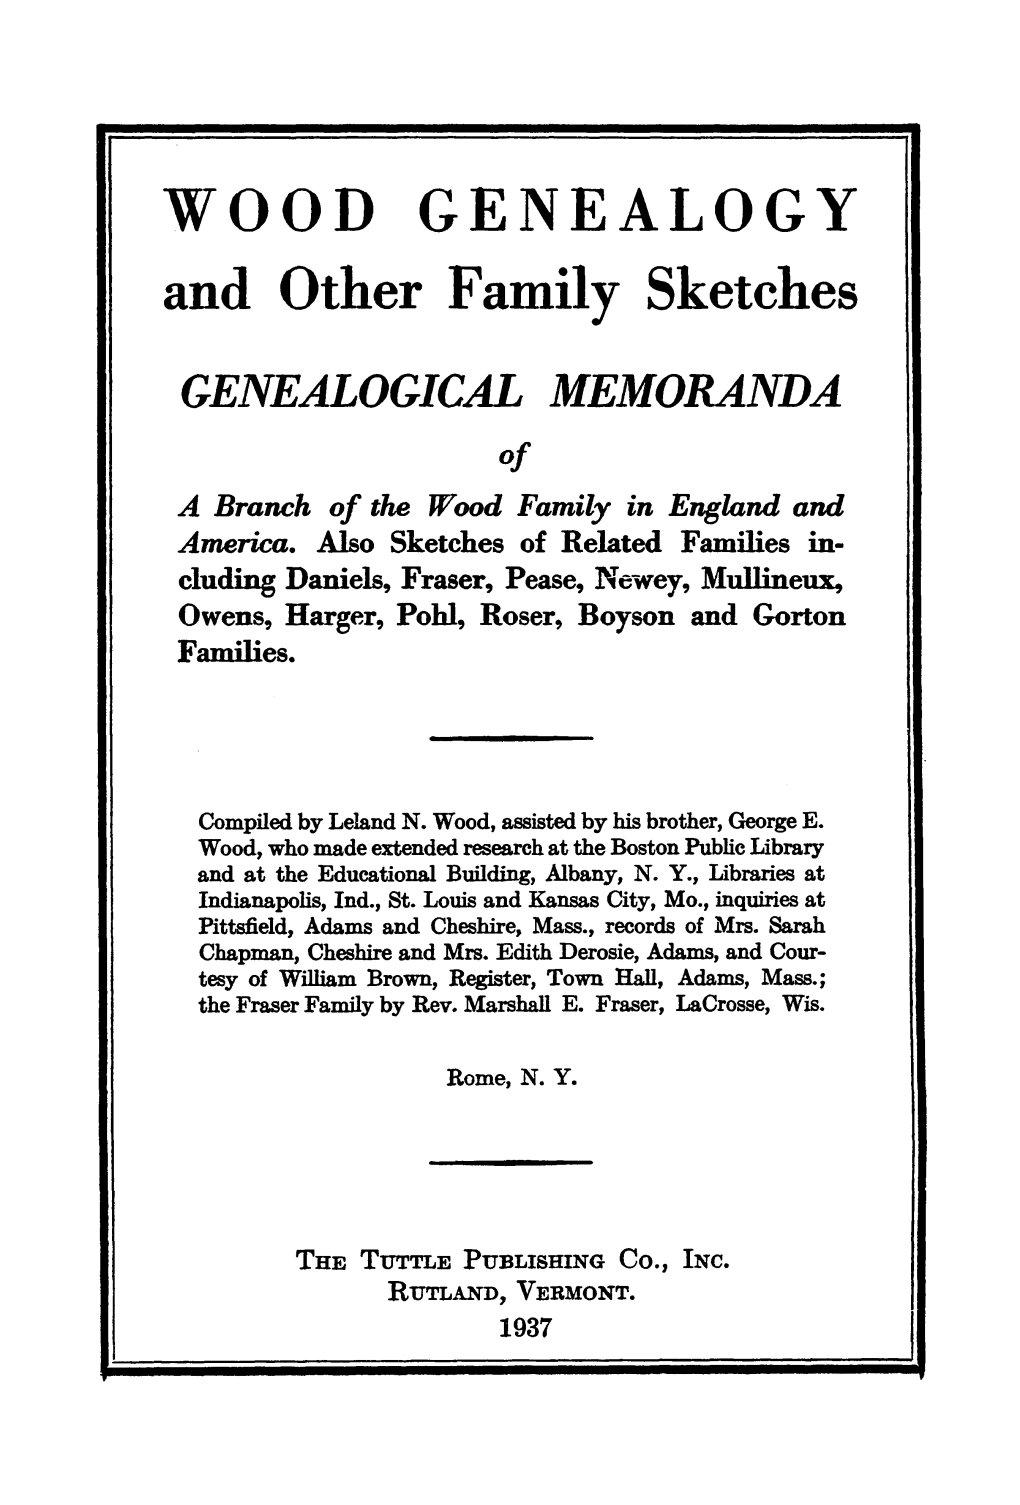 WOOD GENEALOGY and Other Family Sketches